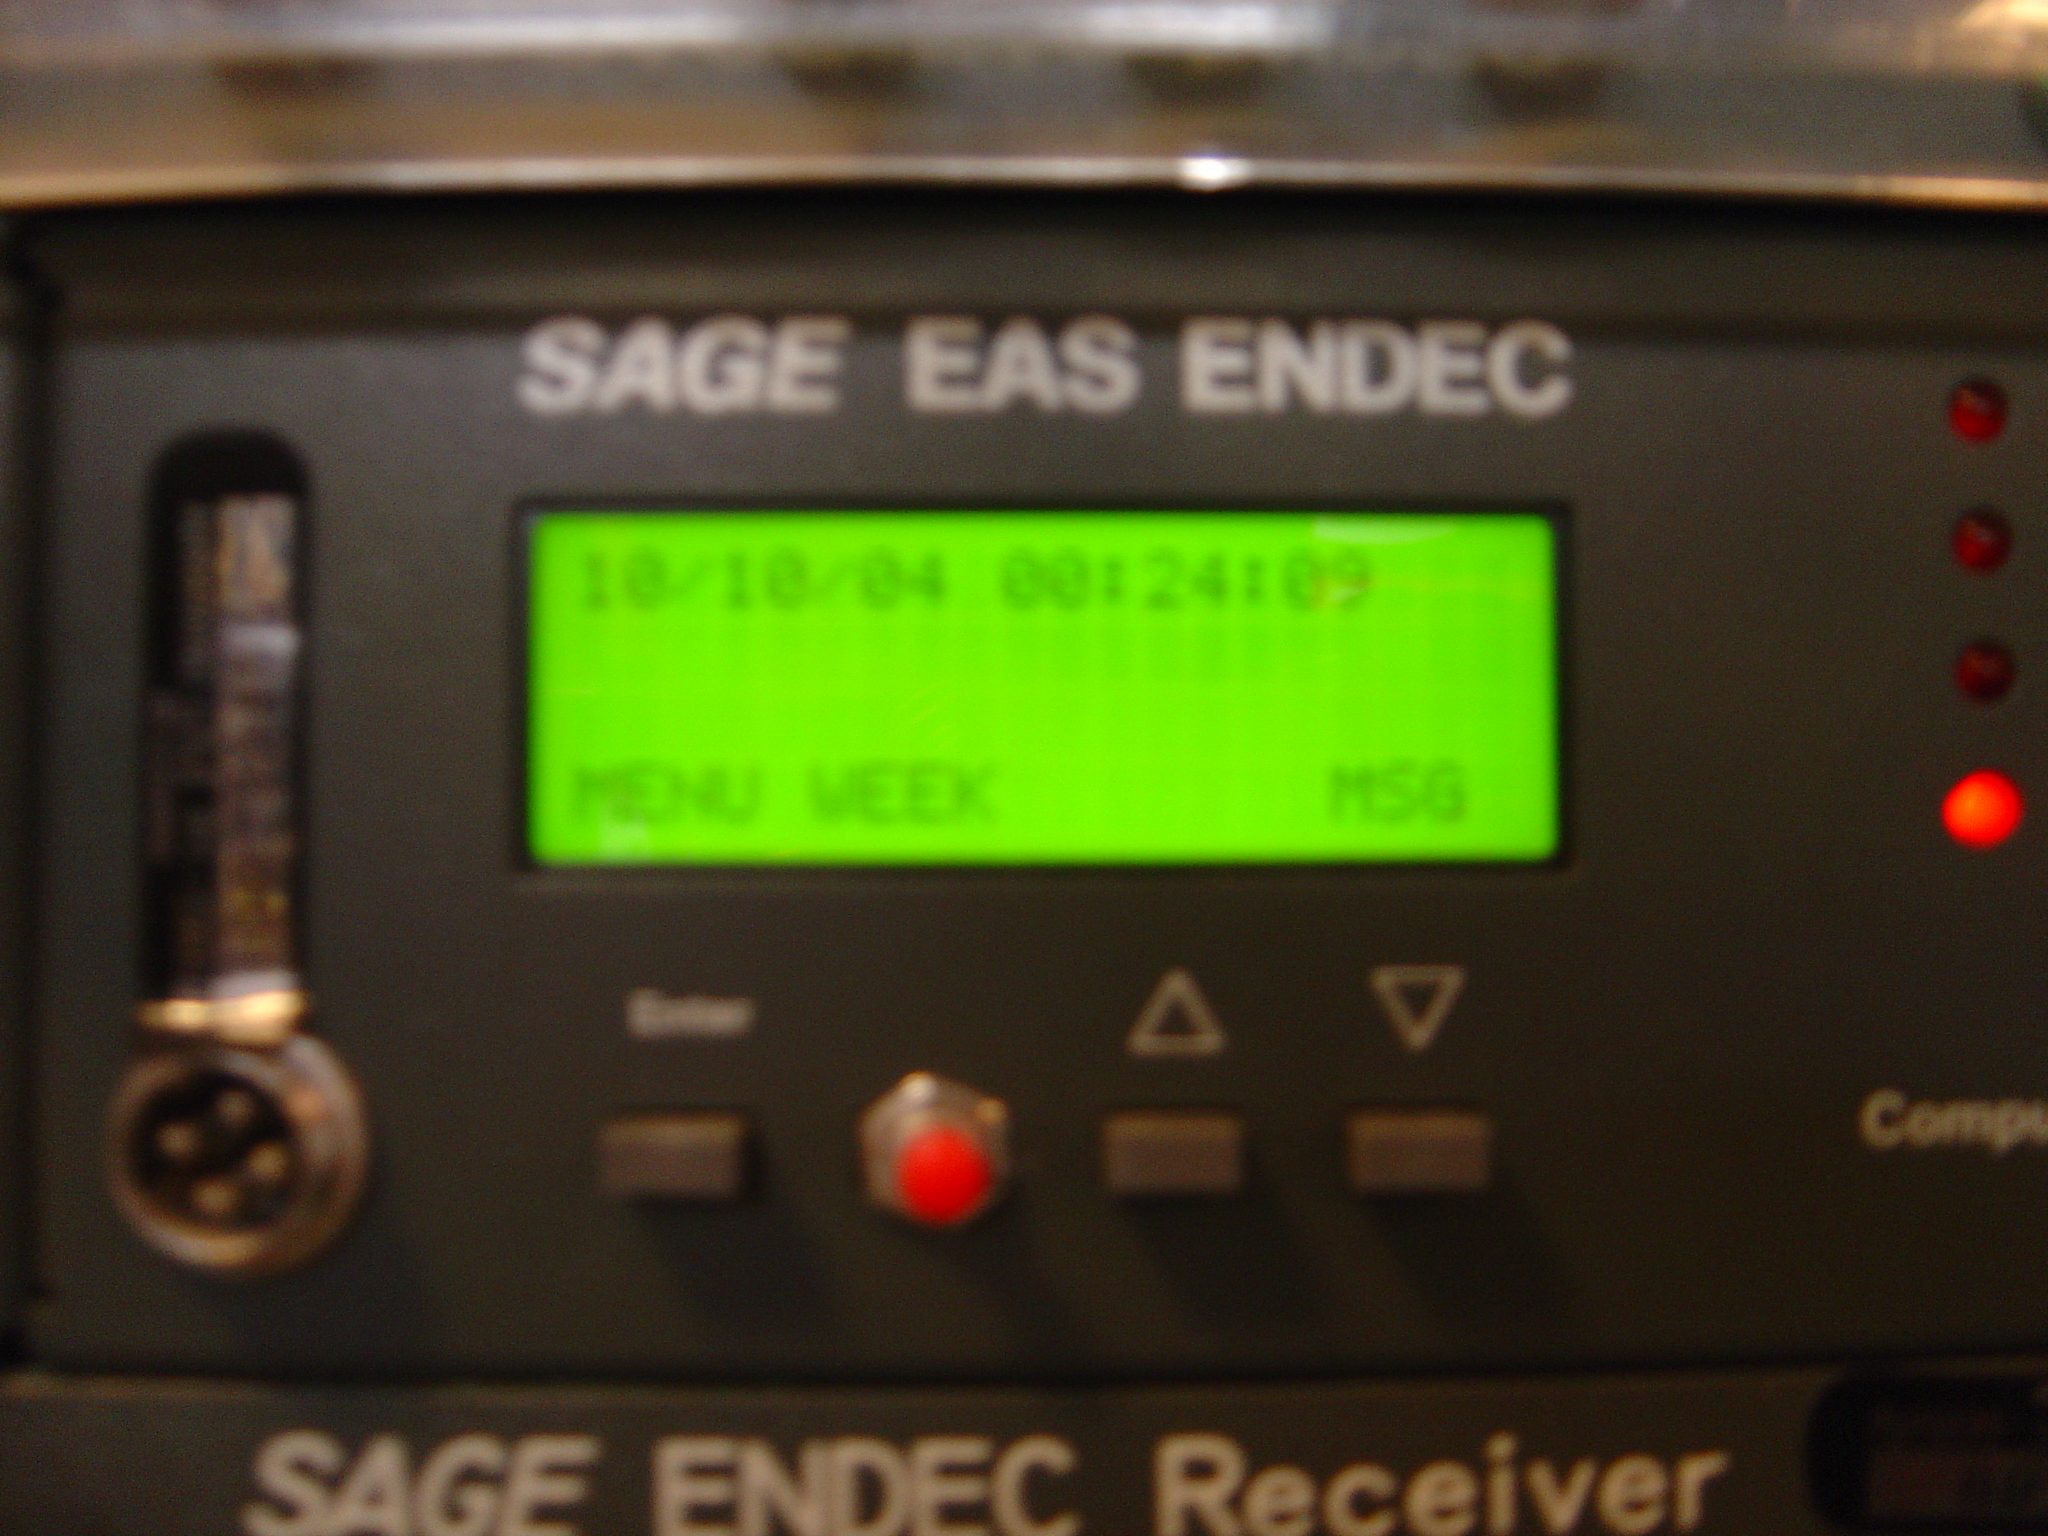 Fuzzy Images of the EAS Receiver